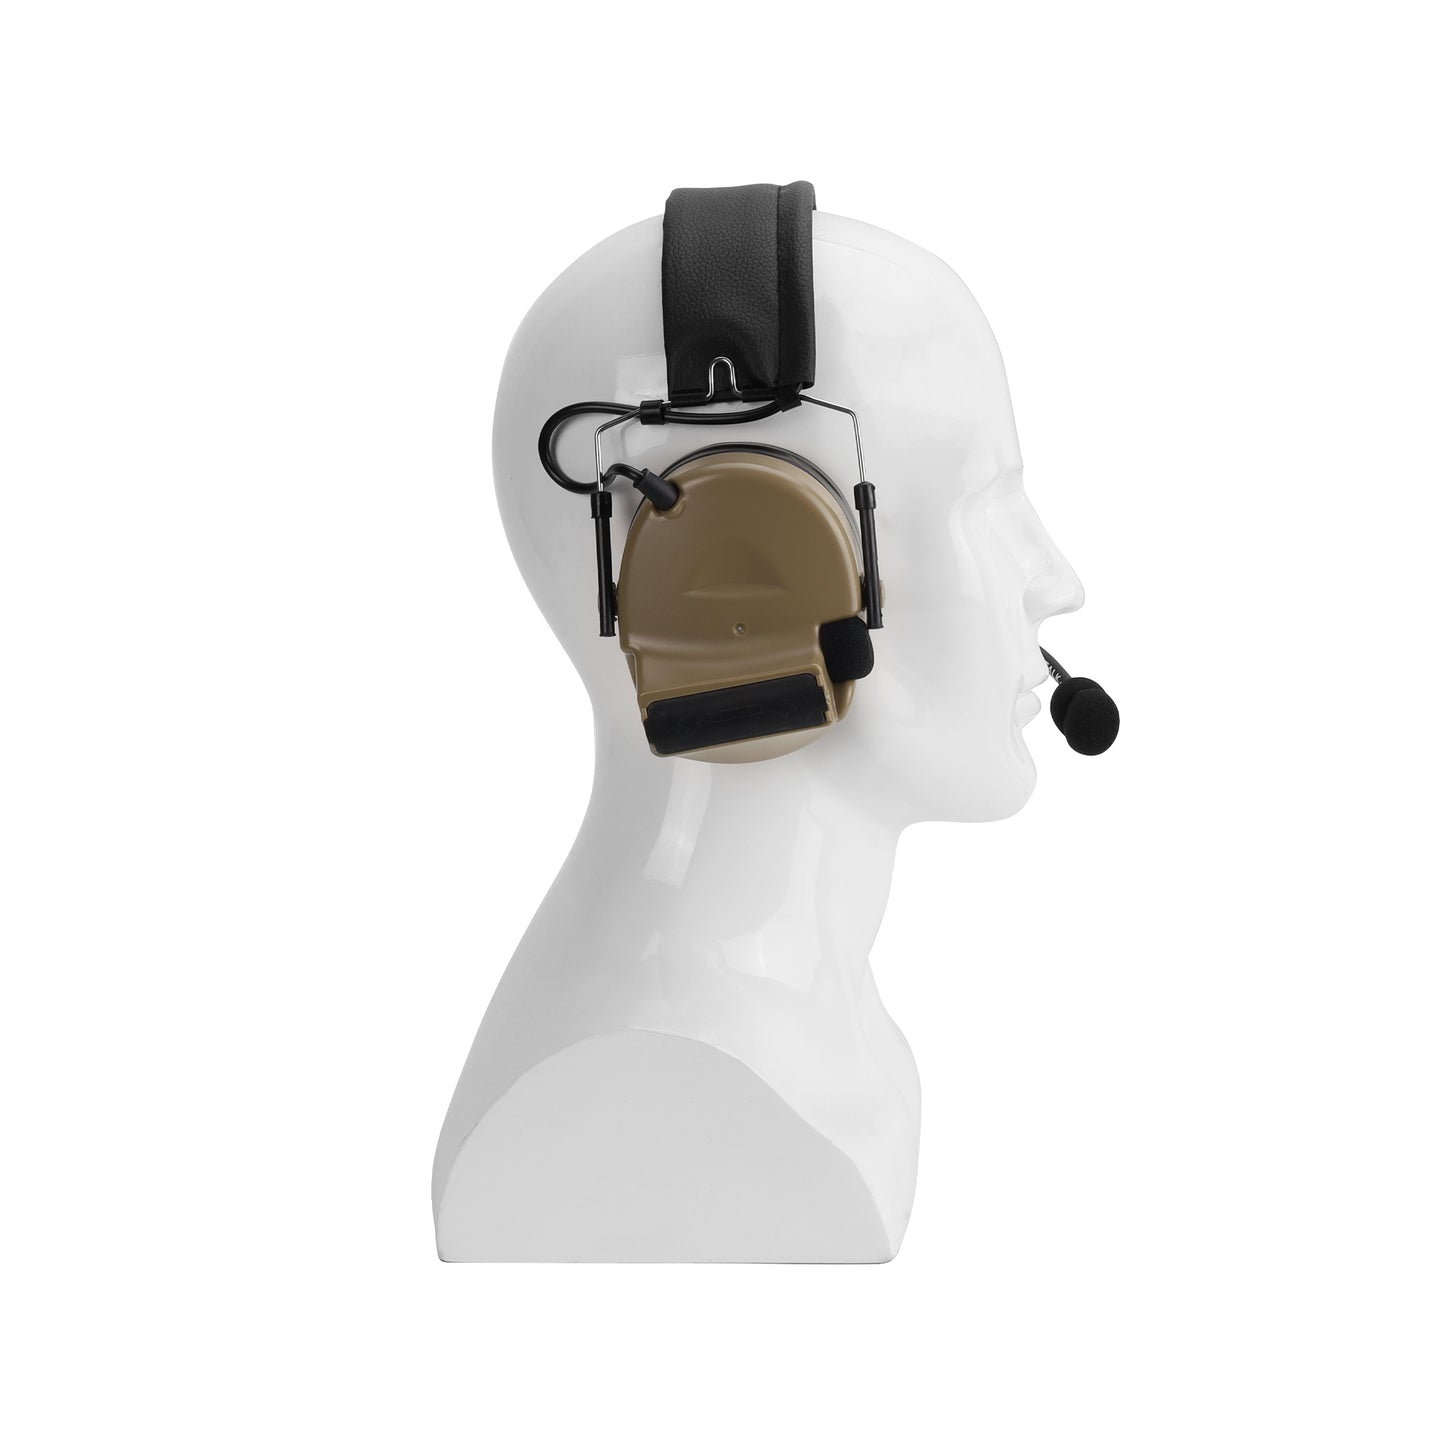 NRR 23db Electronic Hearing Protection Communications Headset